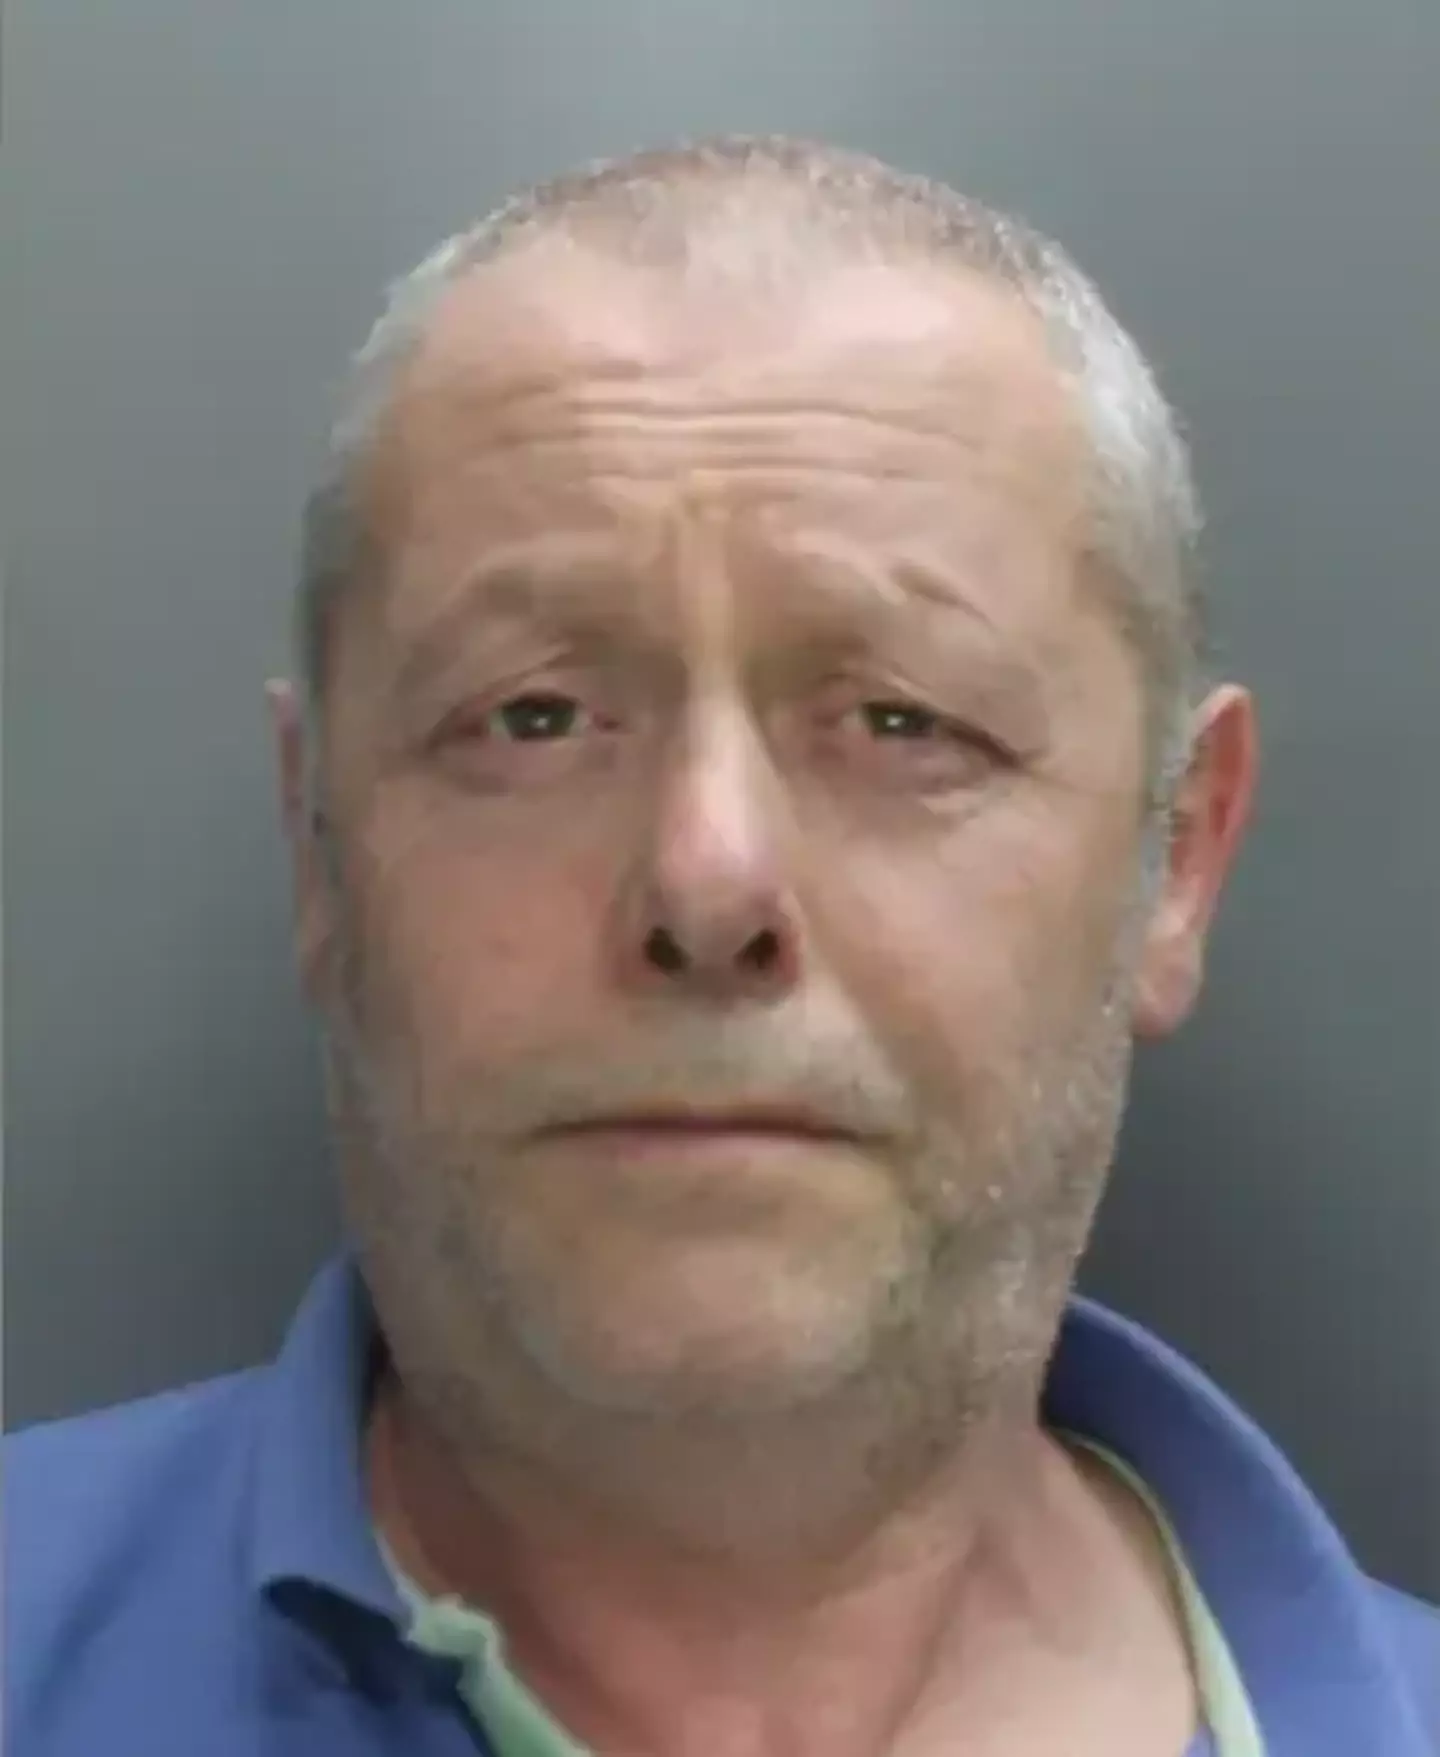 Edward Putman was convicted of fraudulently claiming a jackpot of £2.5 million in 2009.